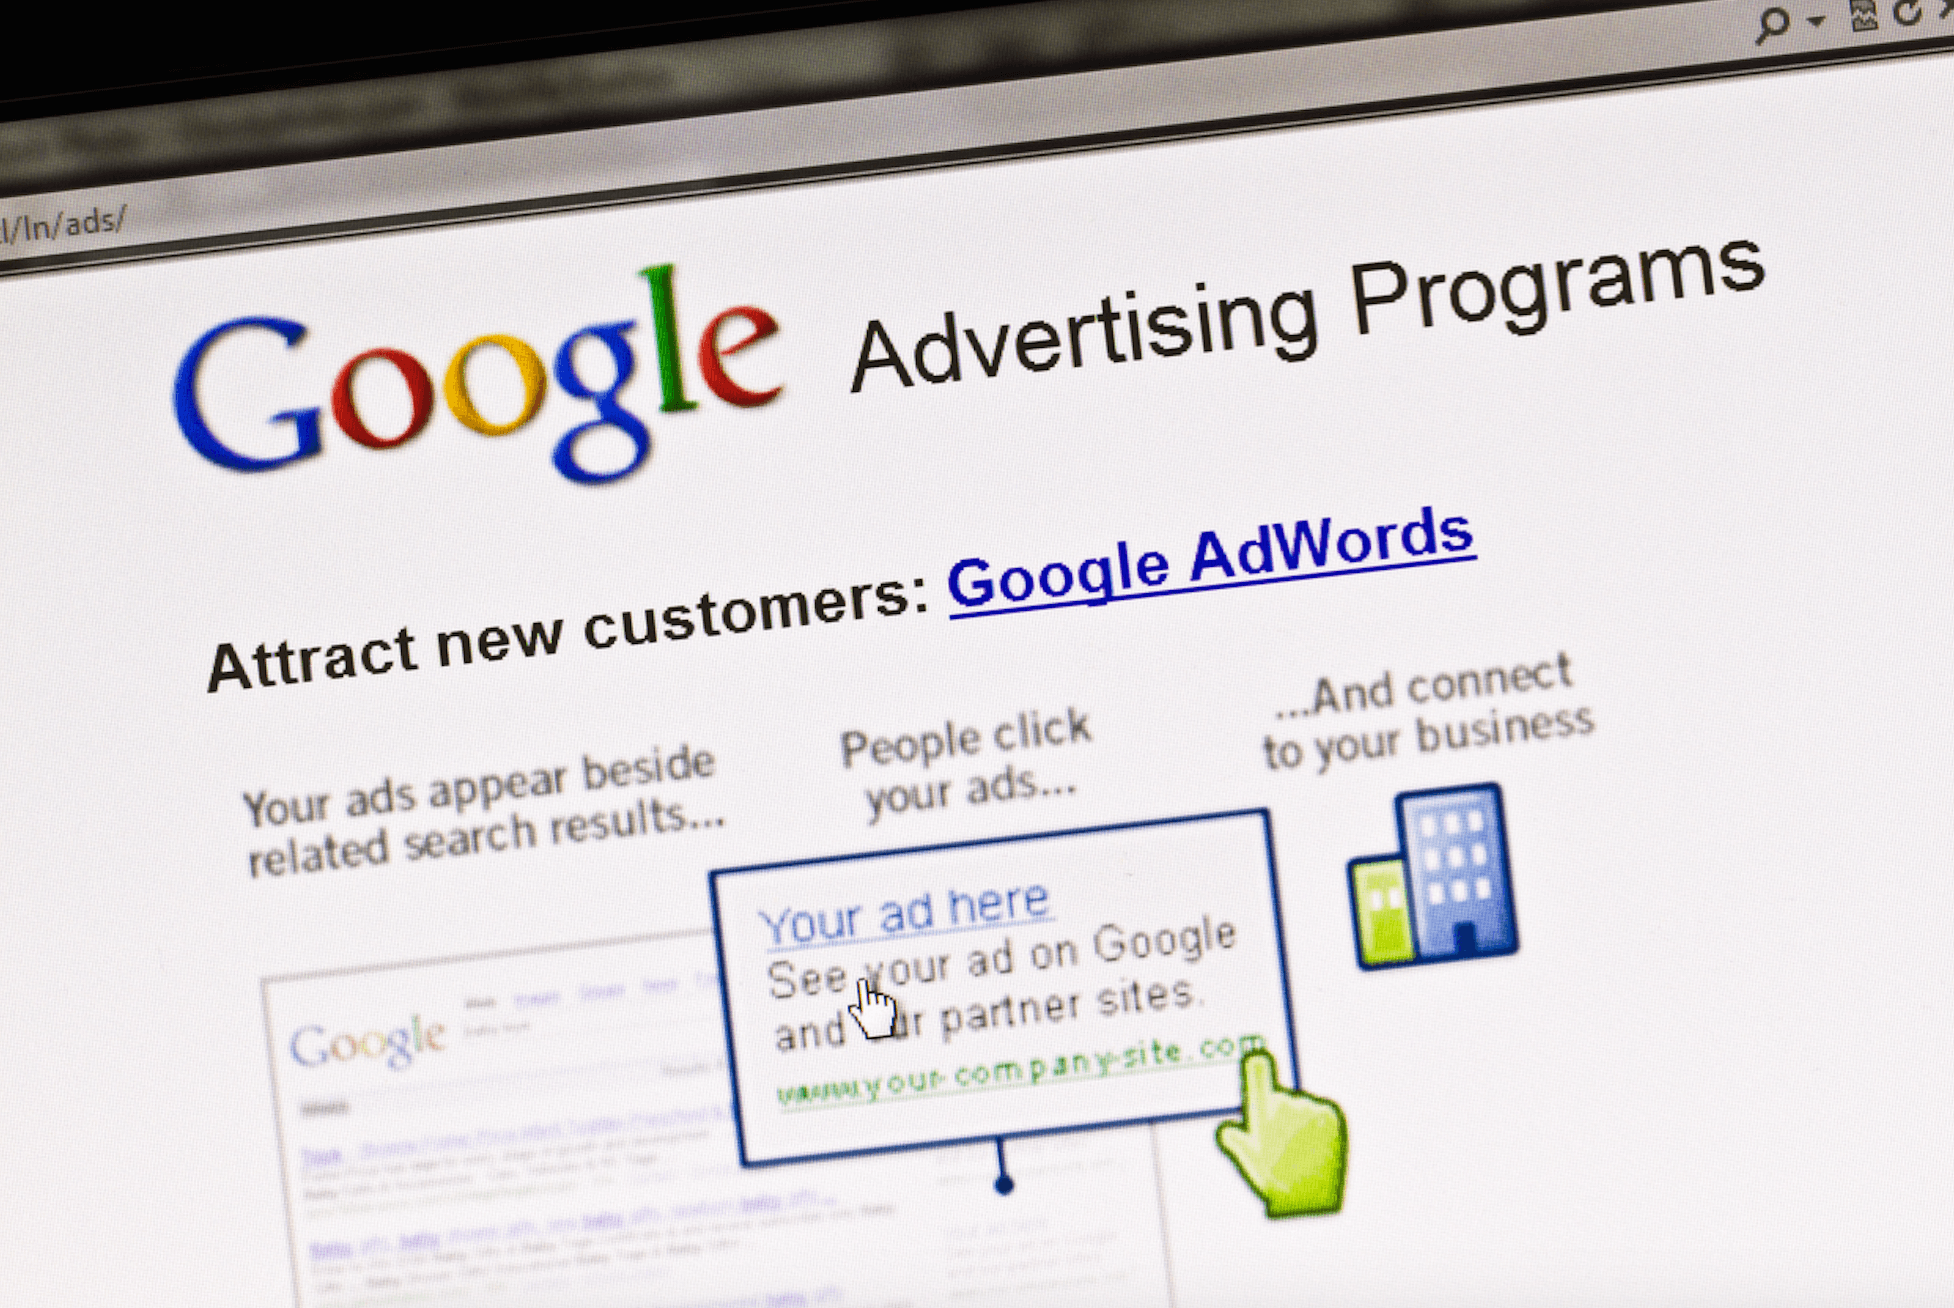 Five Tips from a Google AdWords Strategist